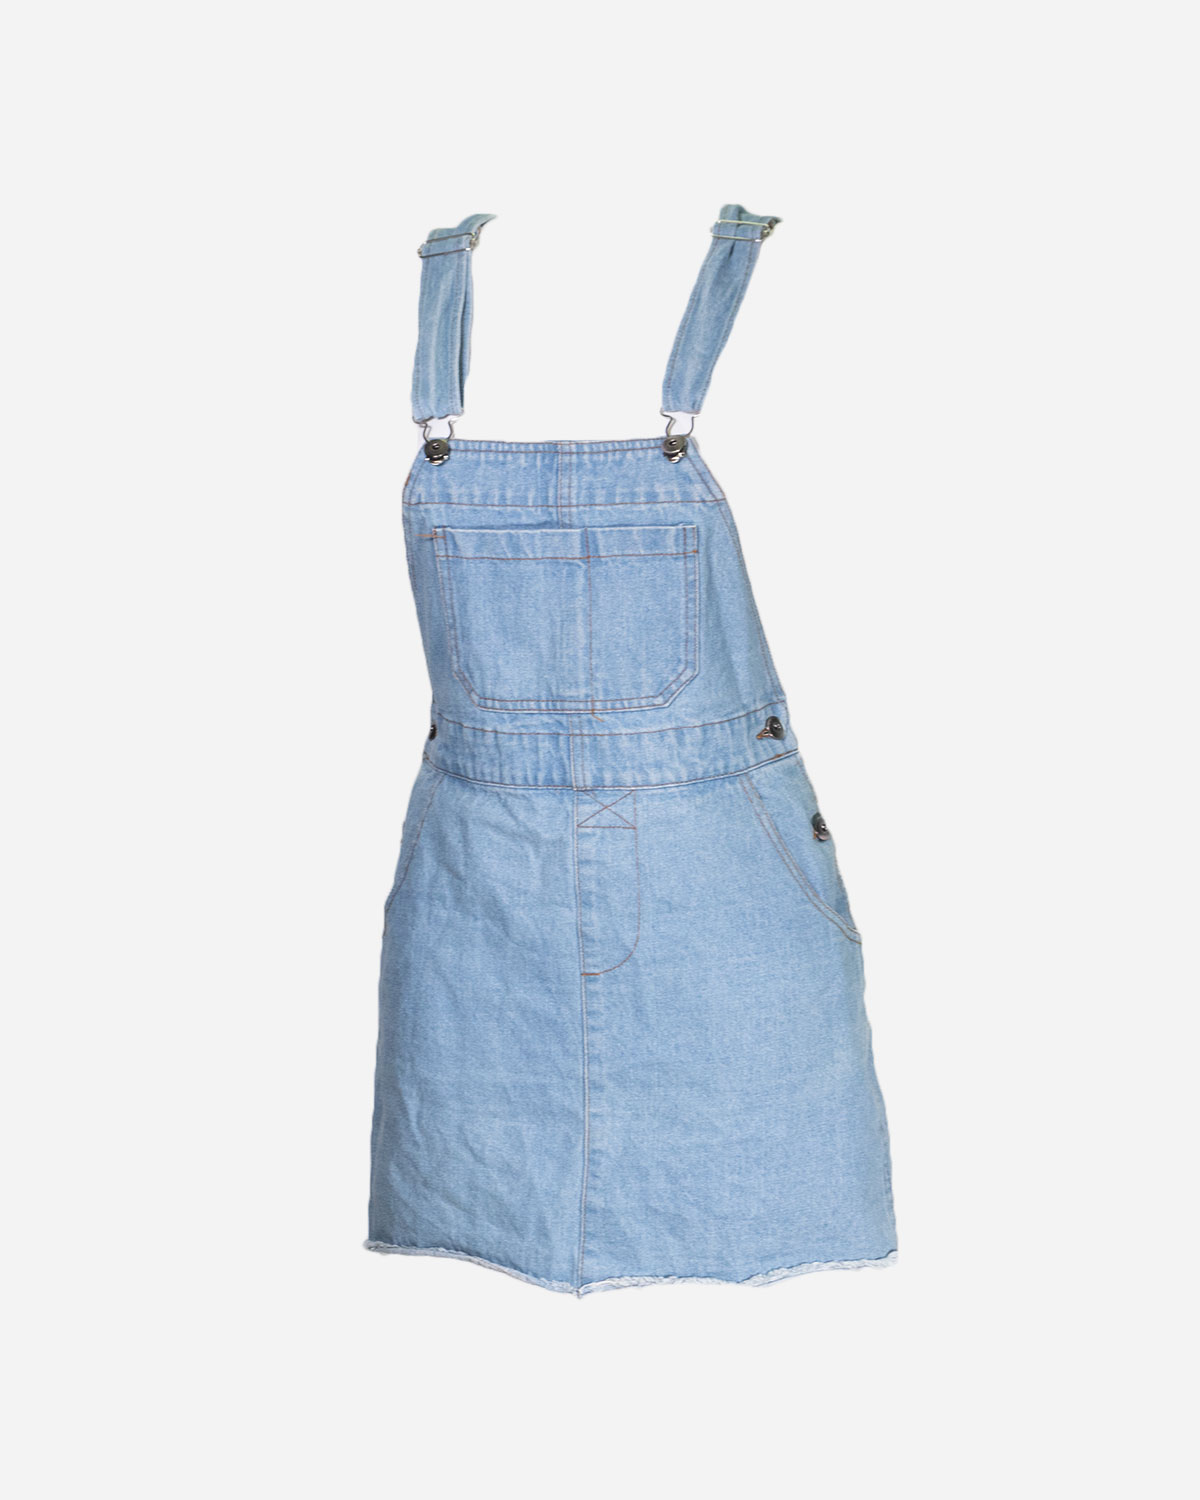 Buy AliveGOT Kids Baby Girls Clothes One-Piece Dress Summers Denim Jeans  Tulle Tutu Color Splicing Overalls Long/Short/Flying Sleeves at Amazon.in